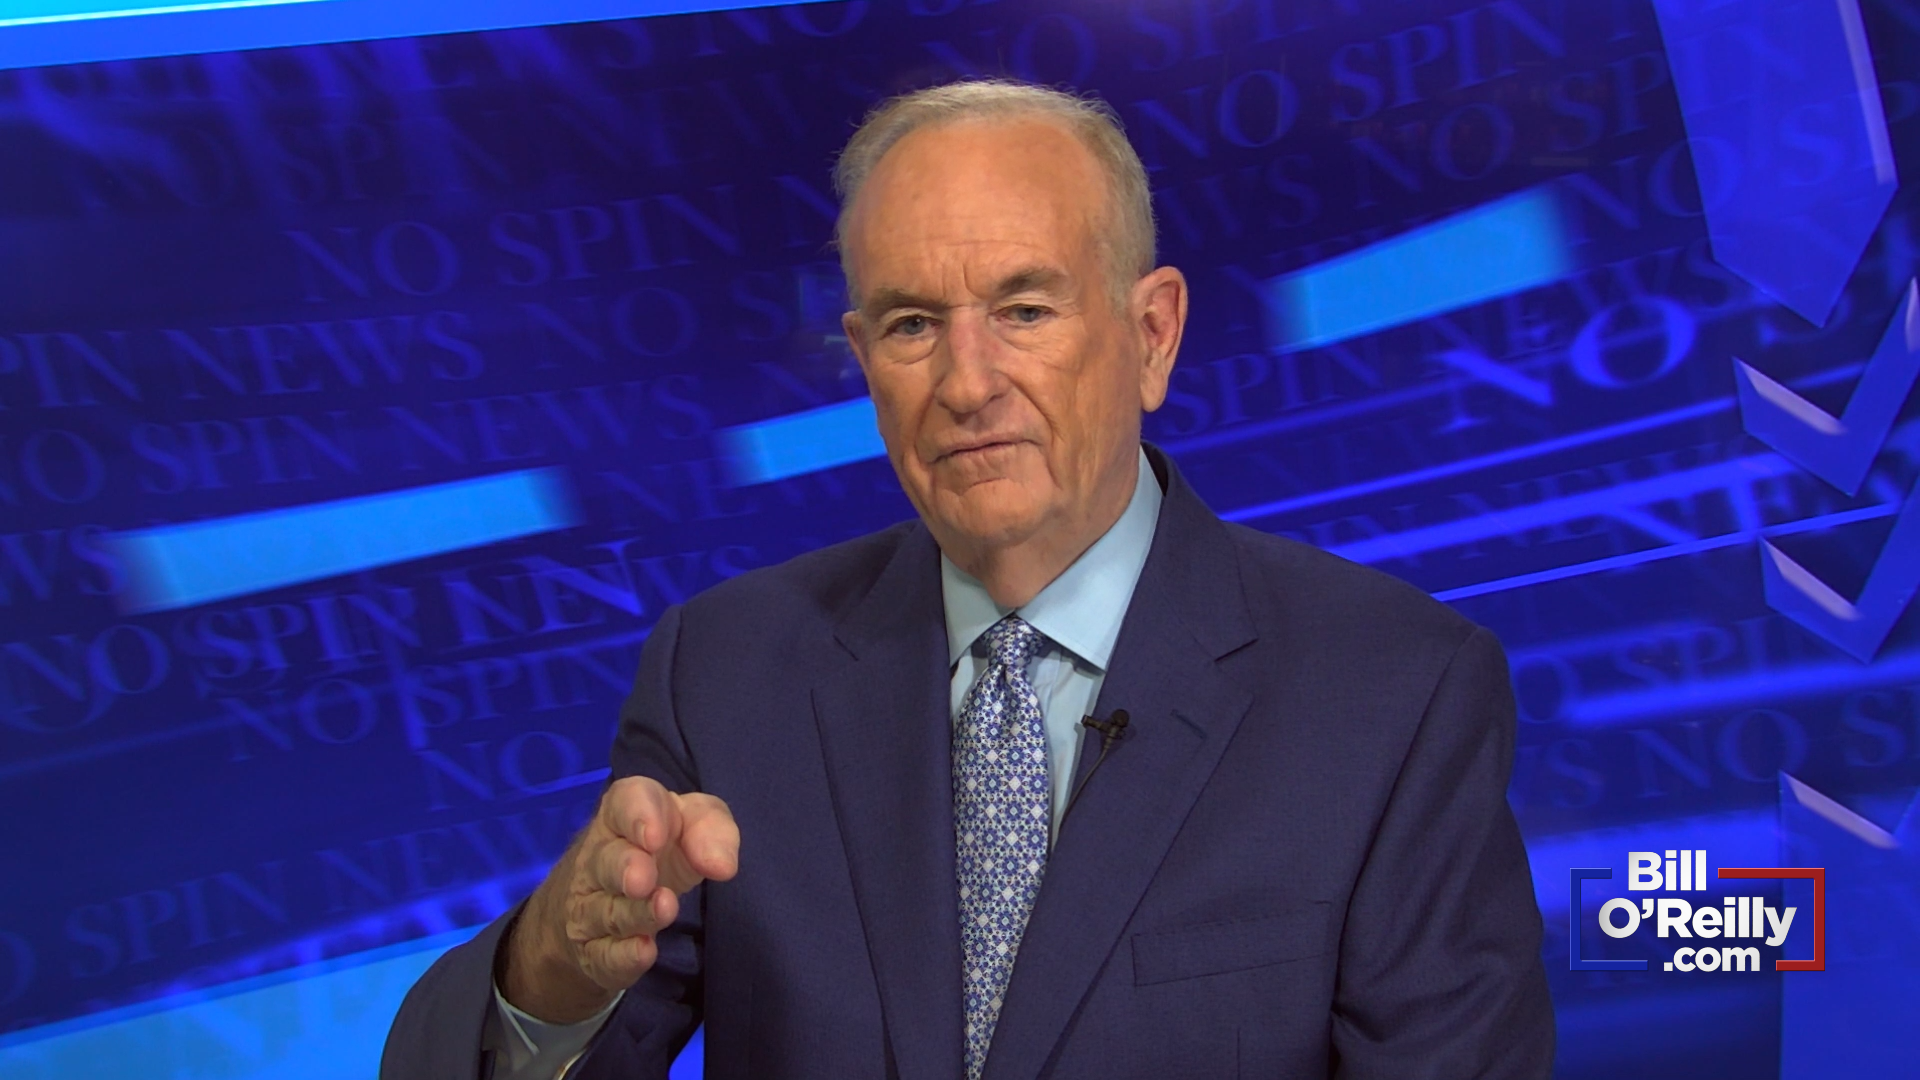 O'Reilly on Tucker Carlson Targeting the 'Committed Right'